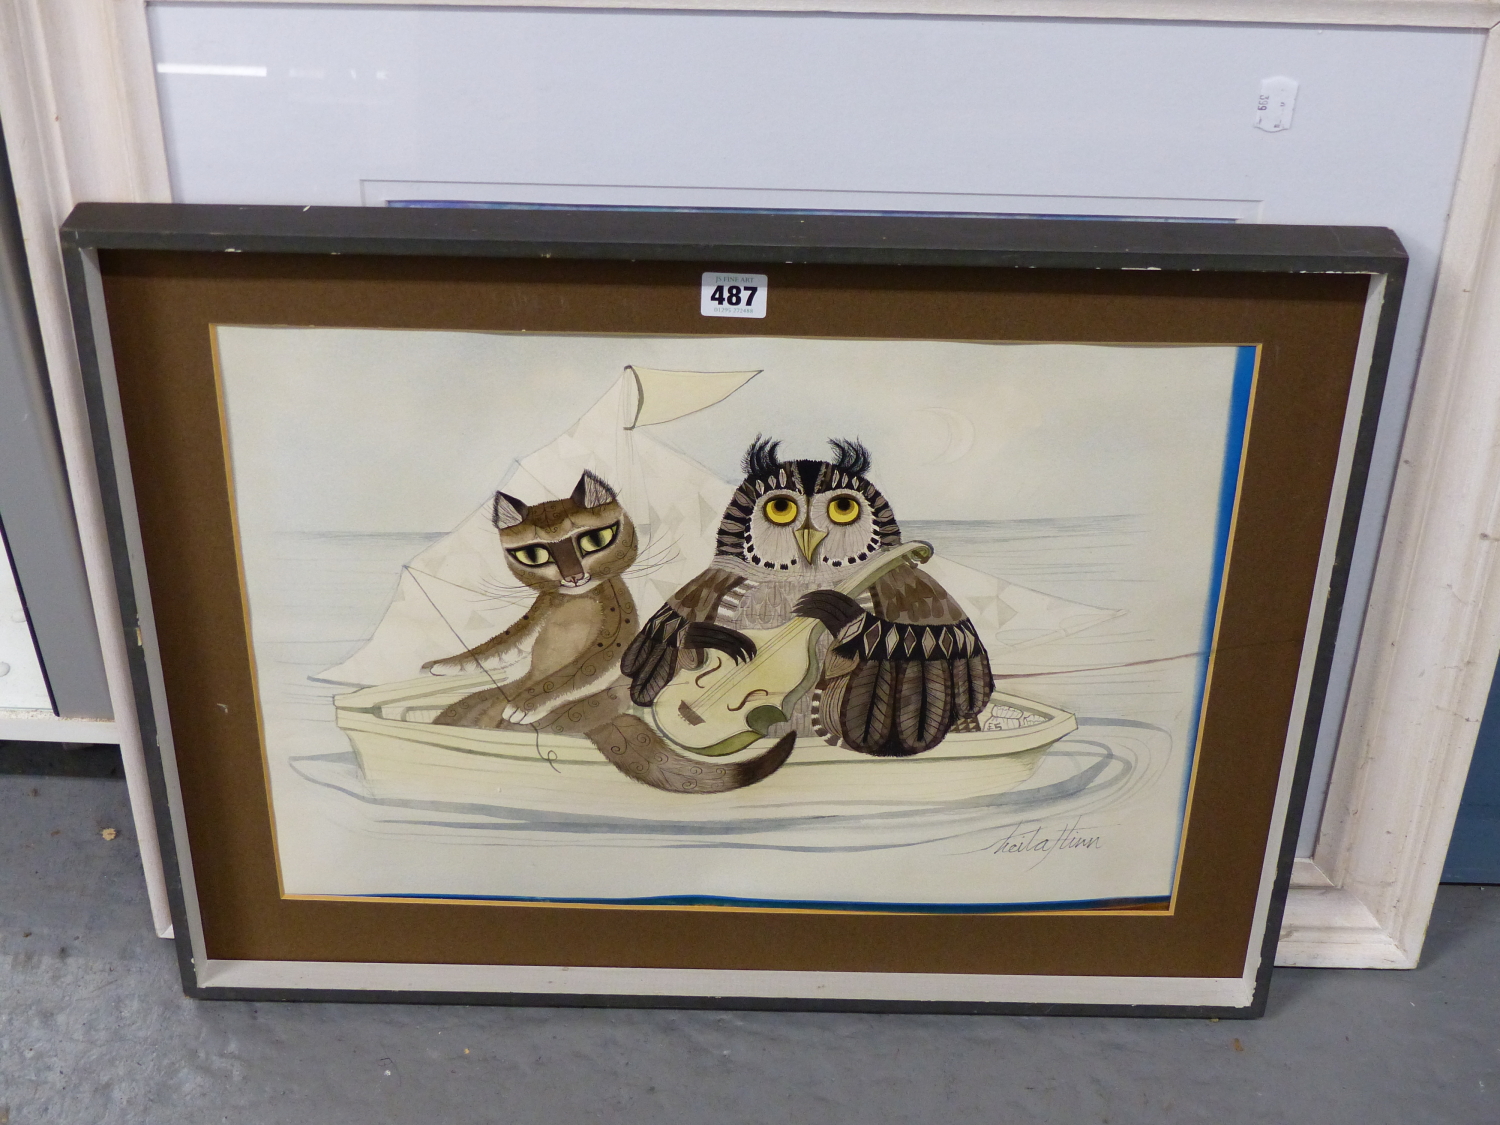 SHEILA FLINN (B.1929) ARR, THE OWL AND THE PUSSYCAT, SIGNED, WATERCOLOUR AND GOUACHE, 50 x 36cms. - Image 3 of 4